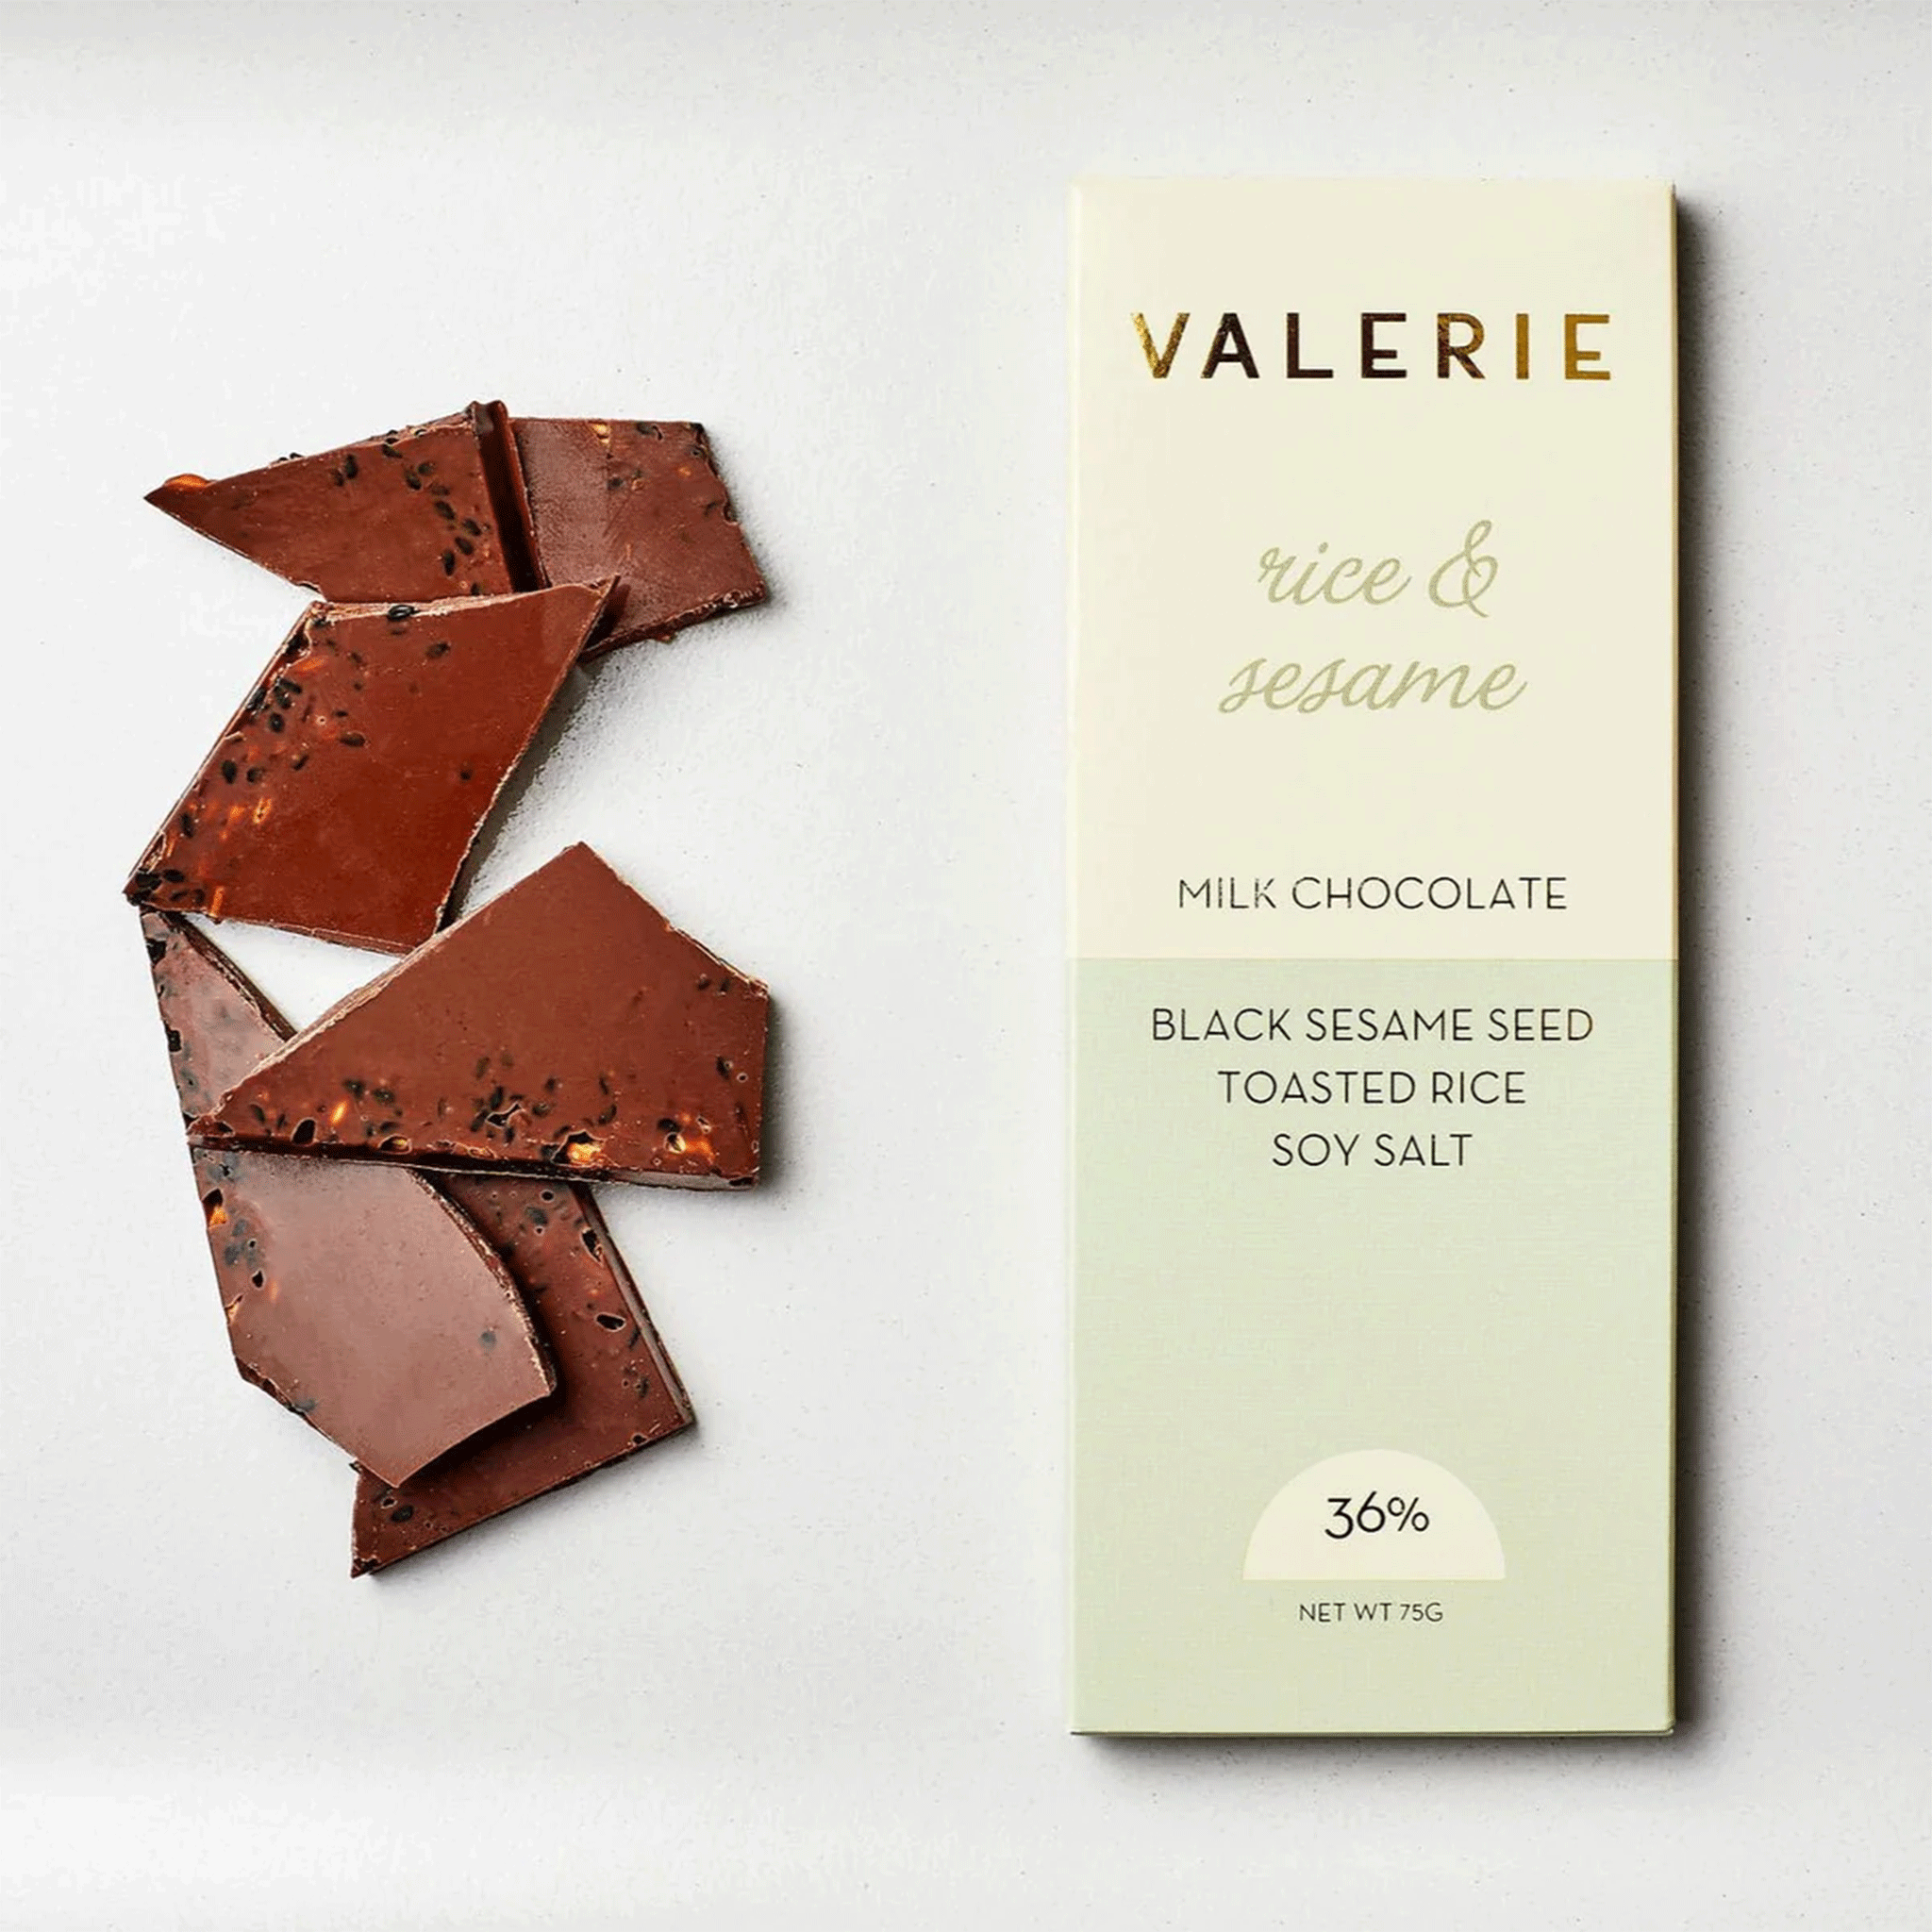 On a white background is a neutral colored bar of chocolate with gold foiled text that reads, &quot;Valerie rice &amp; sesame Milk Chocolate&quot;.